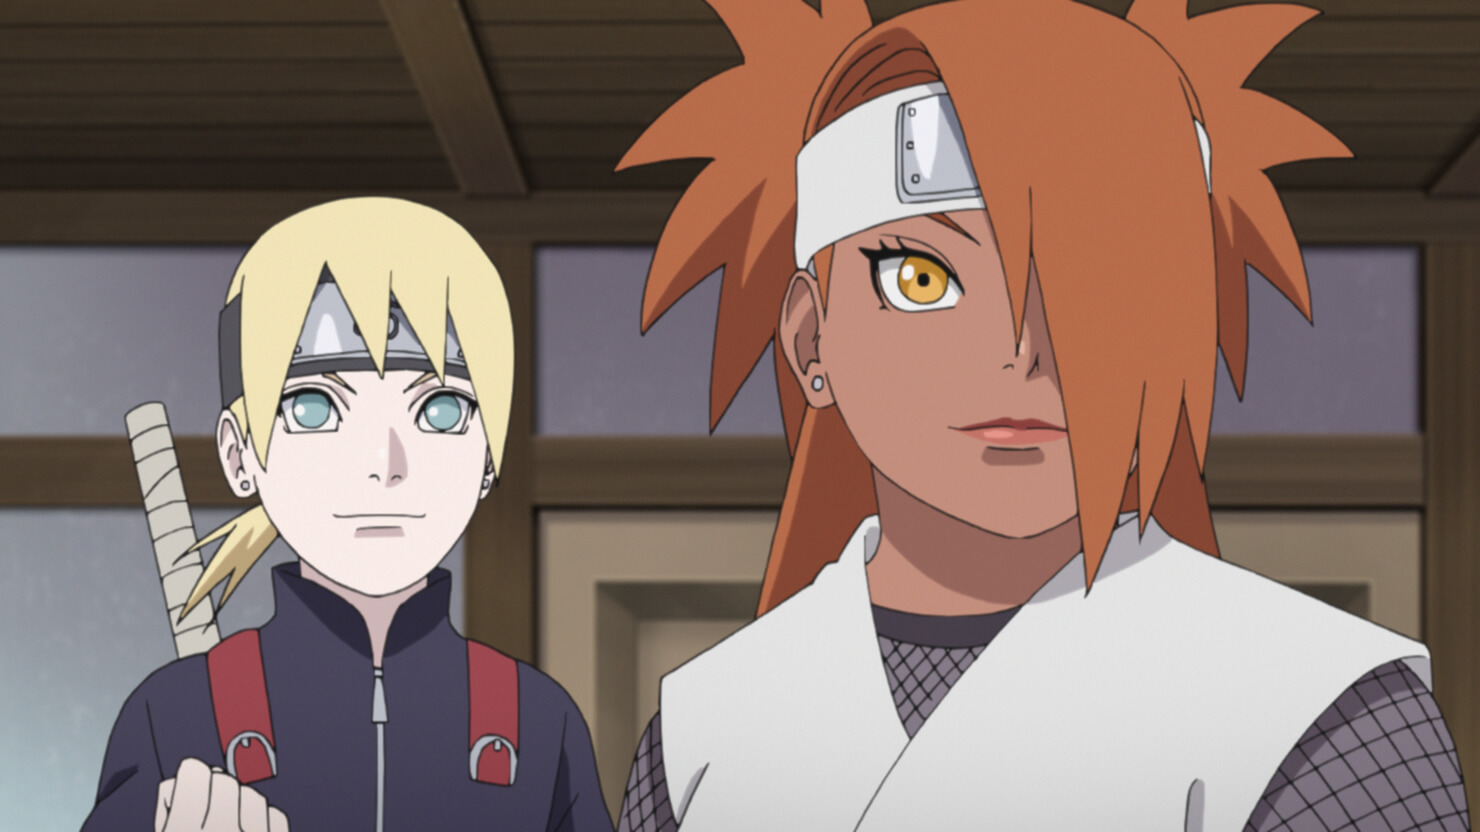 Boruto Episode 287 Release Date And Time